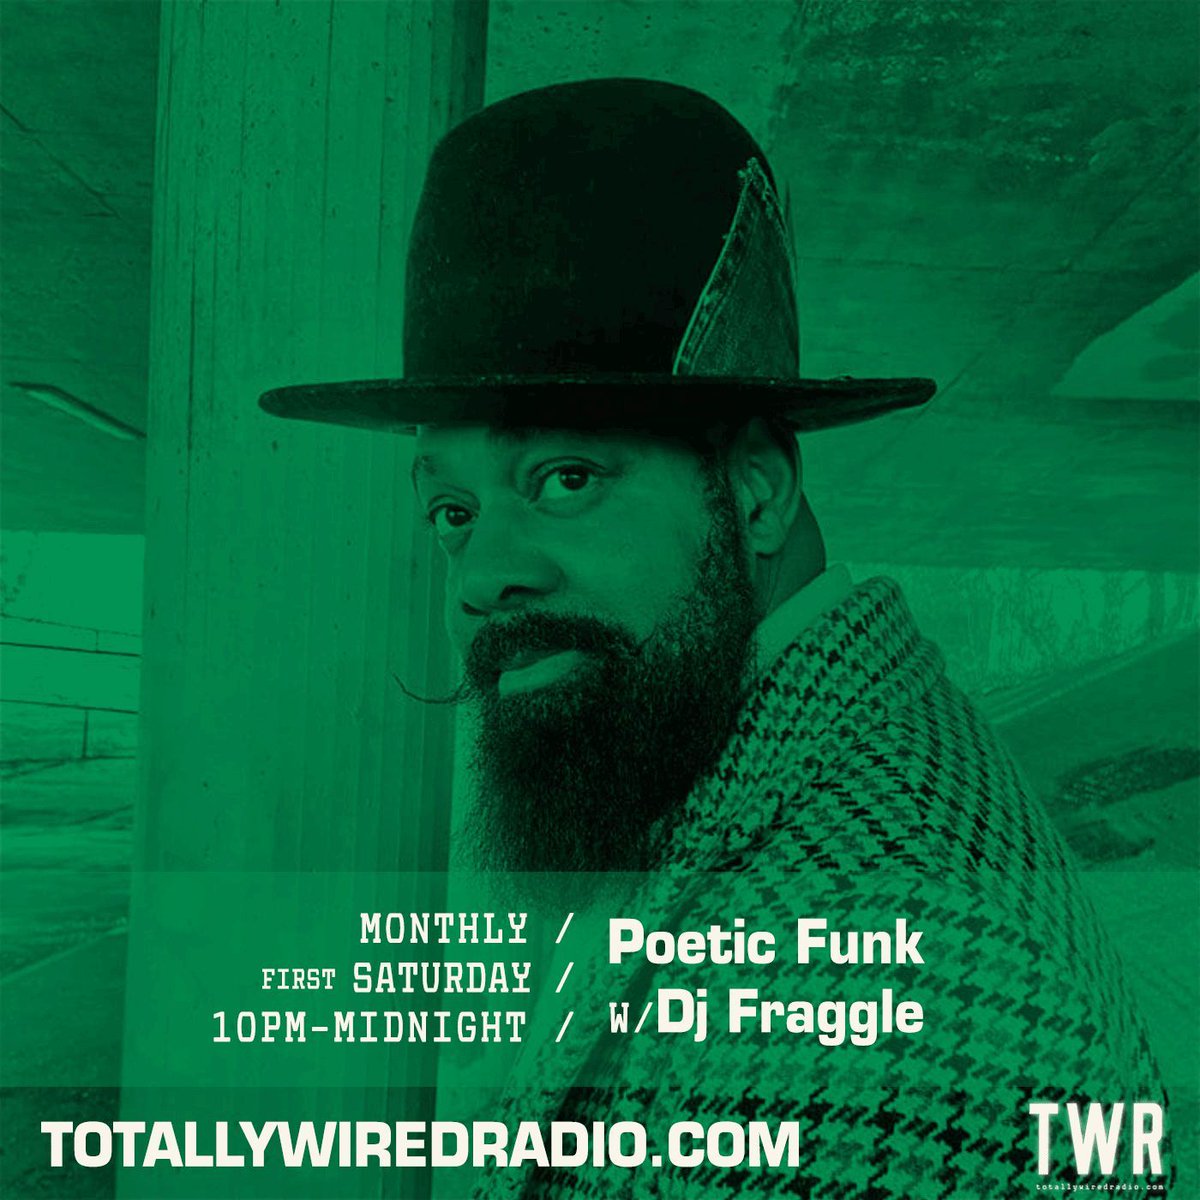 Poetic Funk w/ Dj Fraggle #startingsoon on #TotallyWiredRadio Listen @ Link in bio. 
-
#MusicIsLife #London
-
#Funk #JazzFunk #JazzFusion #Boogie #Disco #80sSoul #Latin #AfroBeat #Salsoul #RareGrooves #Pop